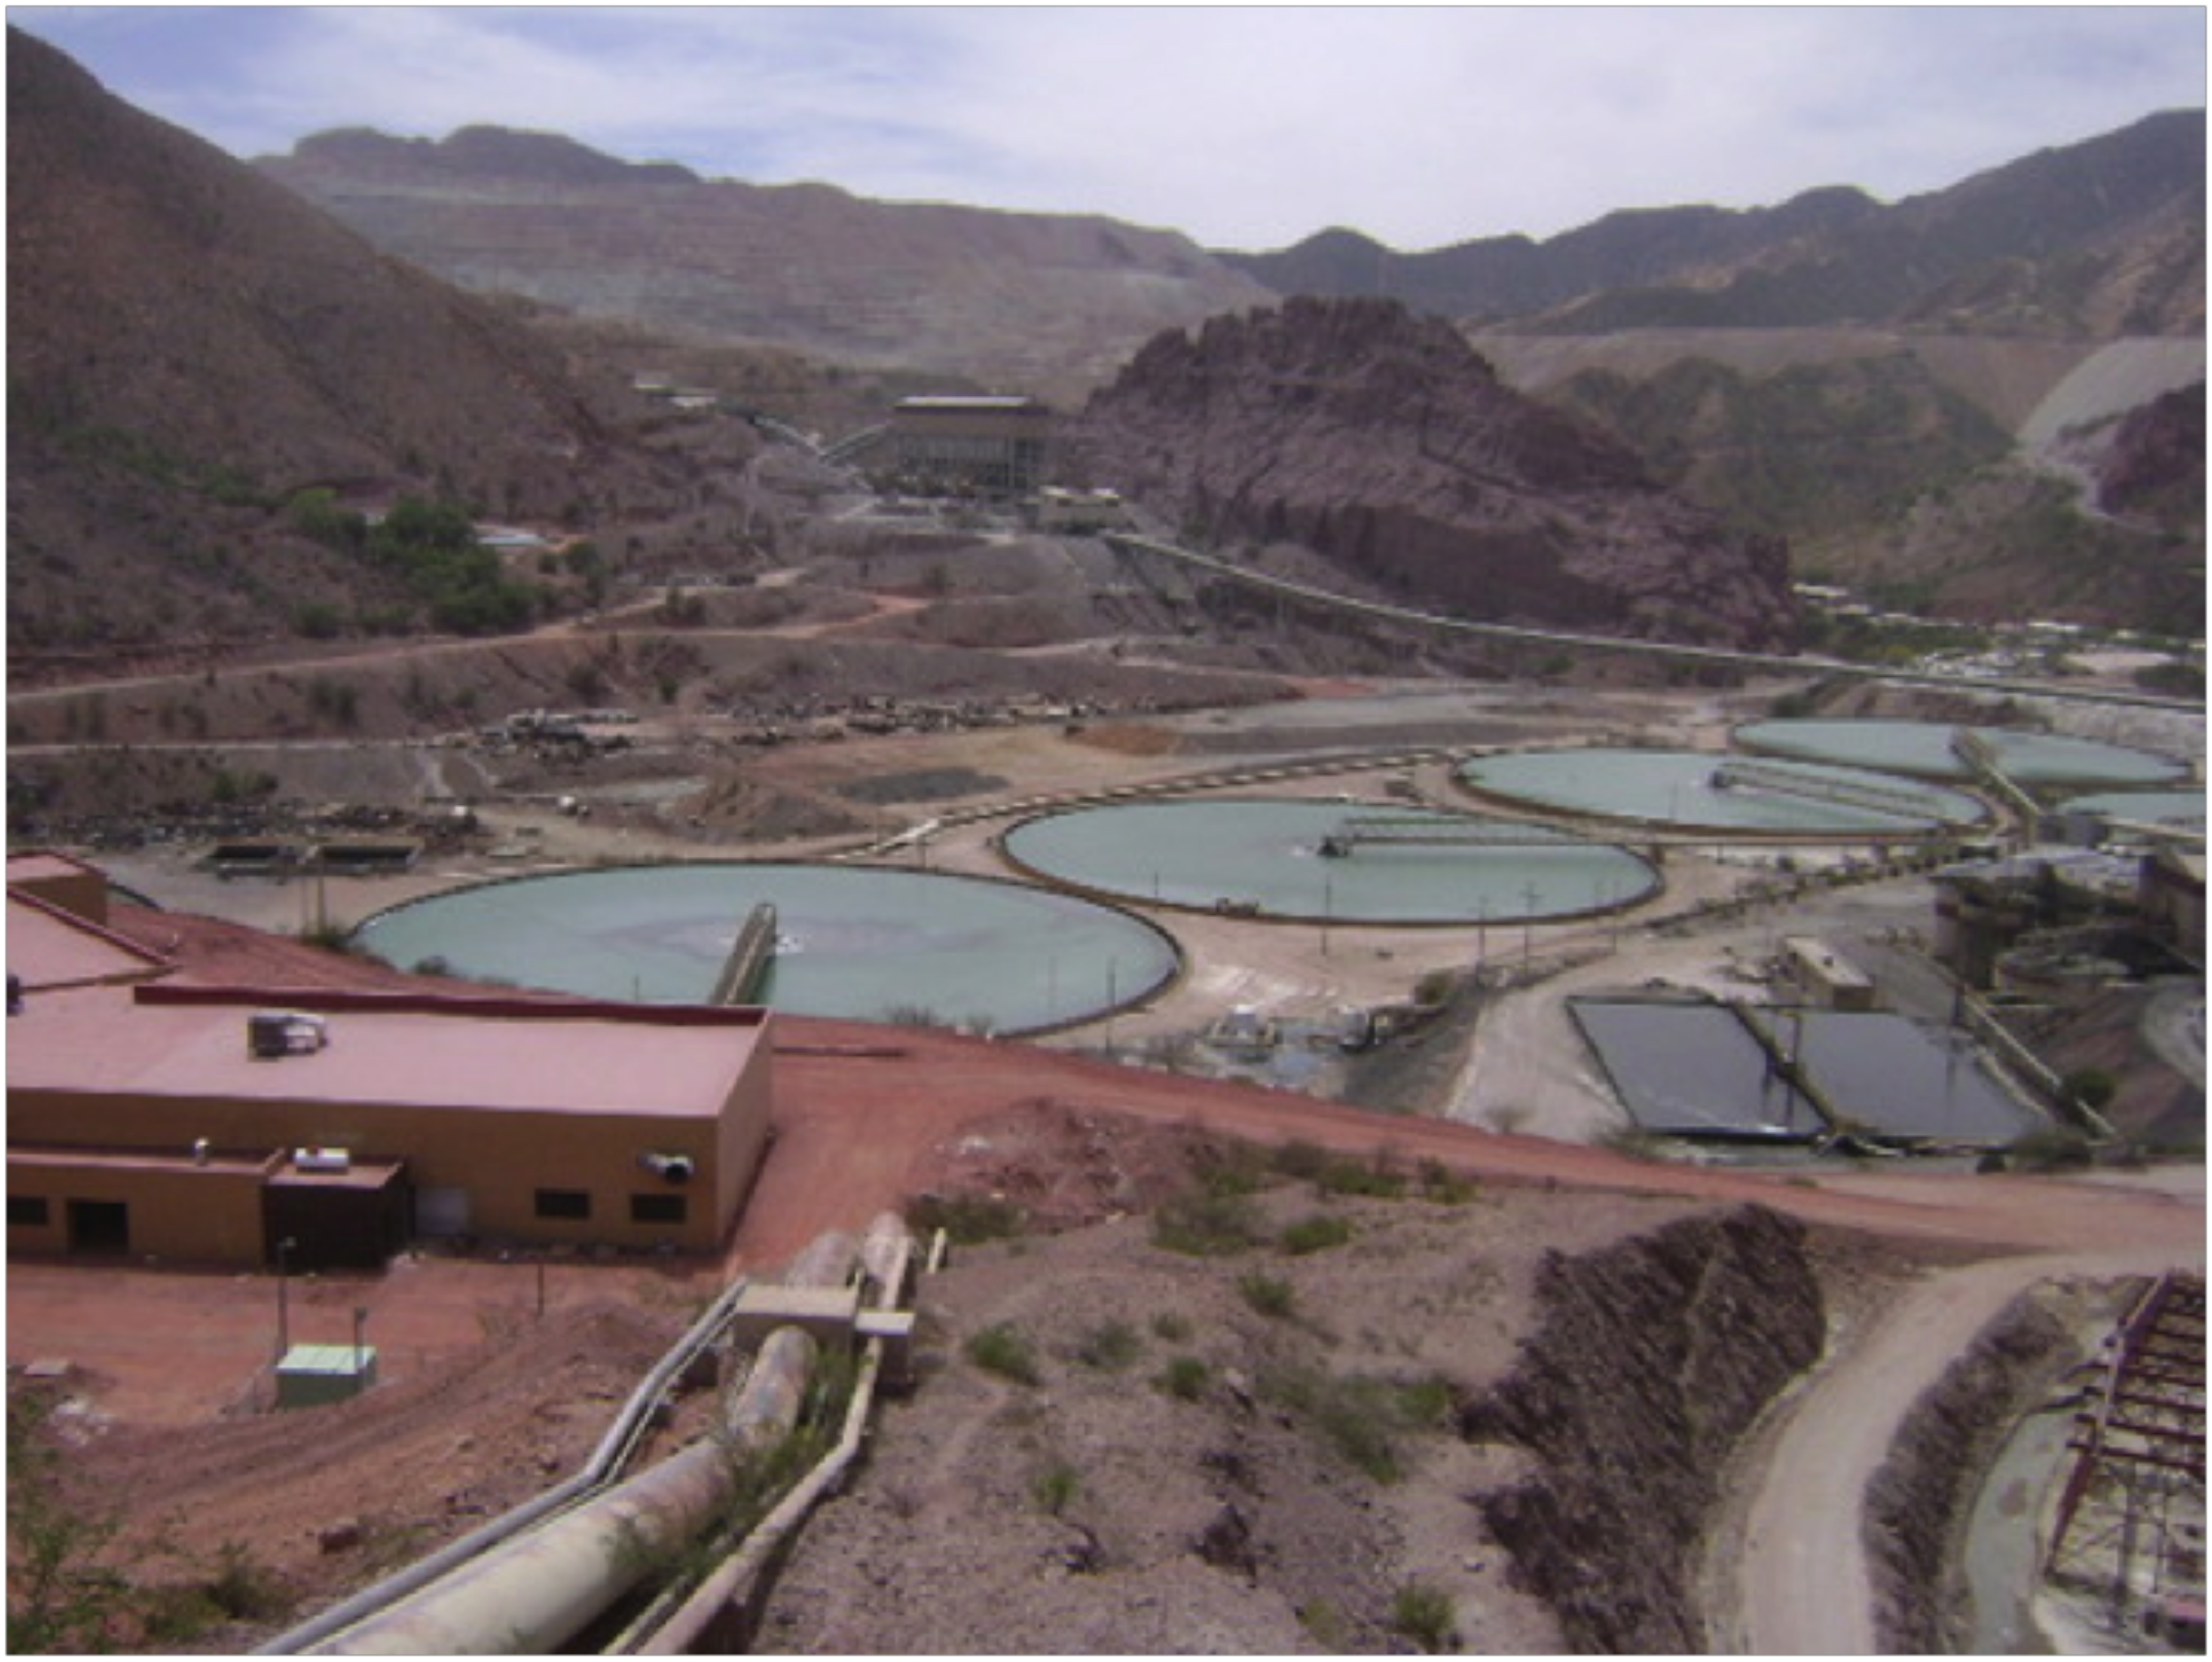 Mining Water in Sonora: Grupo México’s “Irregular” Water Permits in the Sonora, Yaqui, and San Pedro River Basins